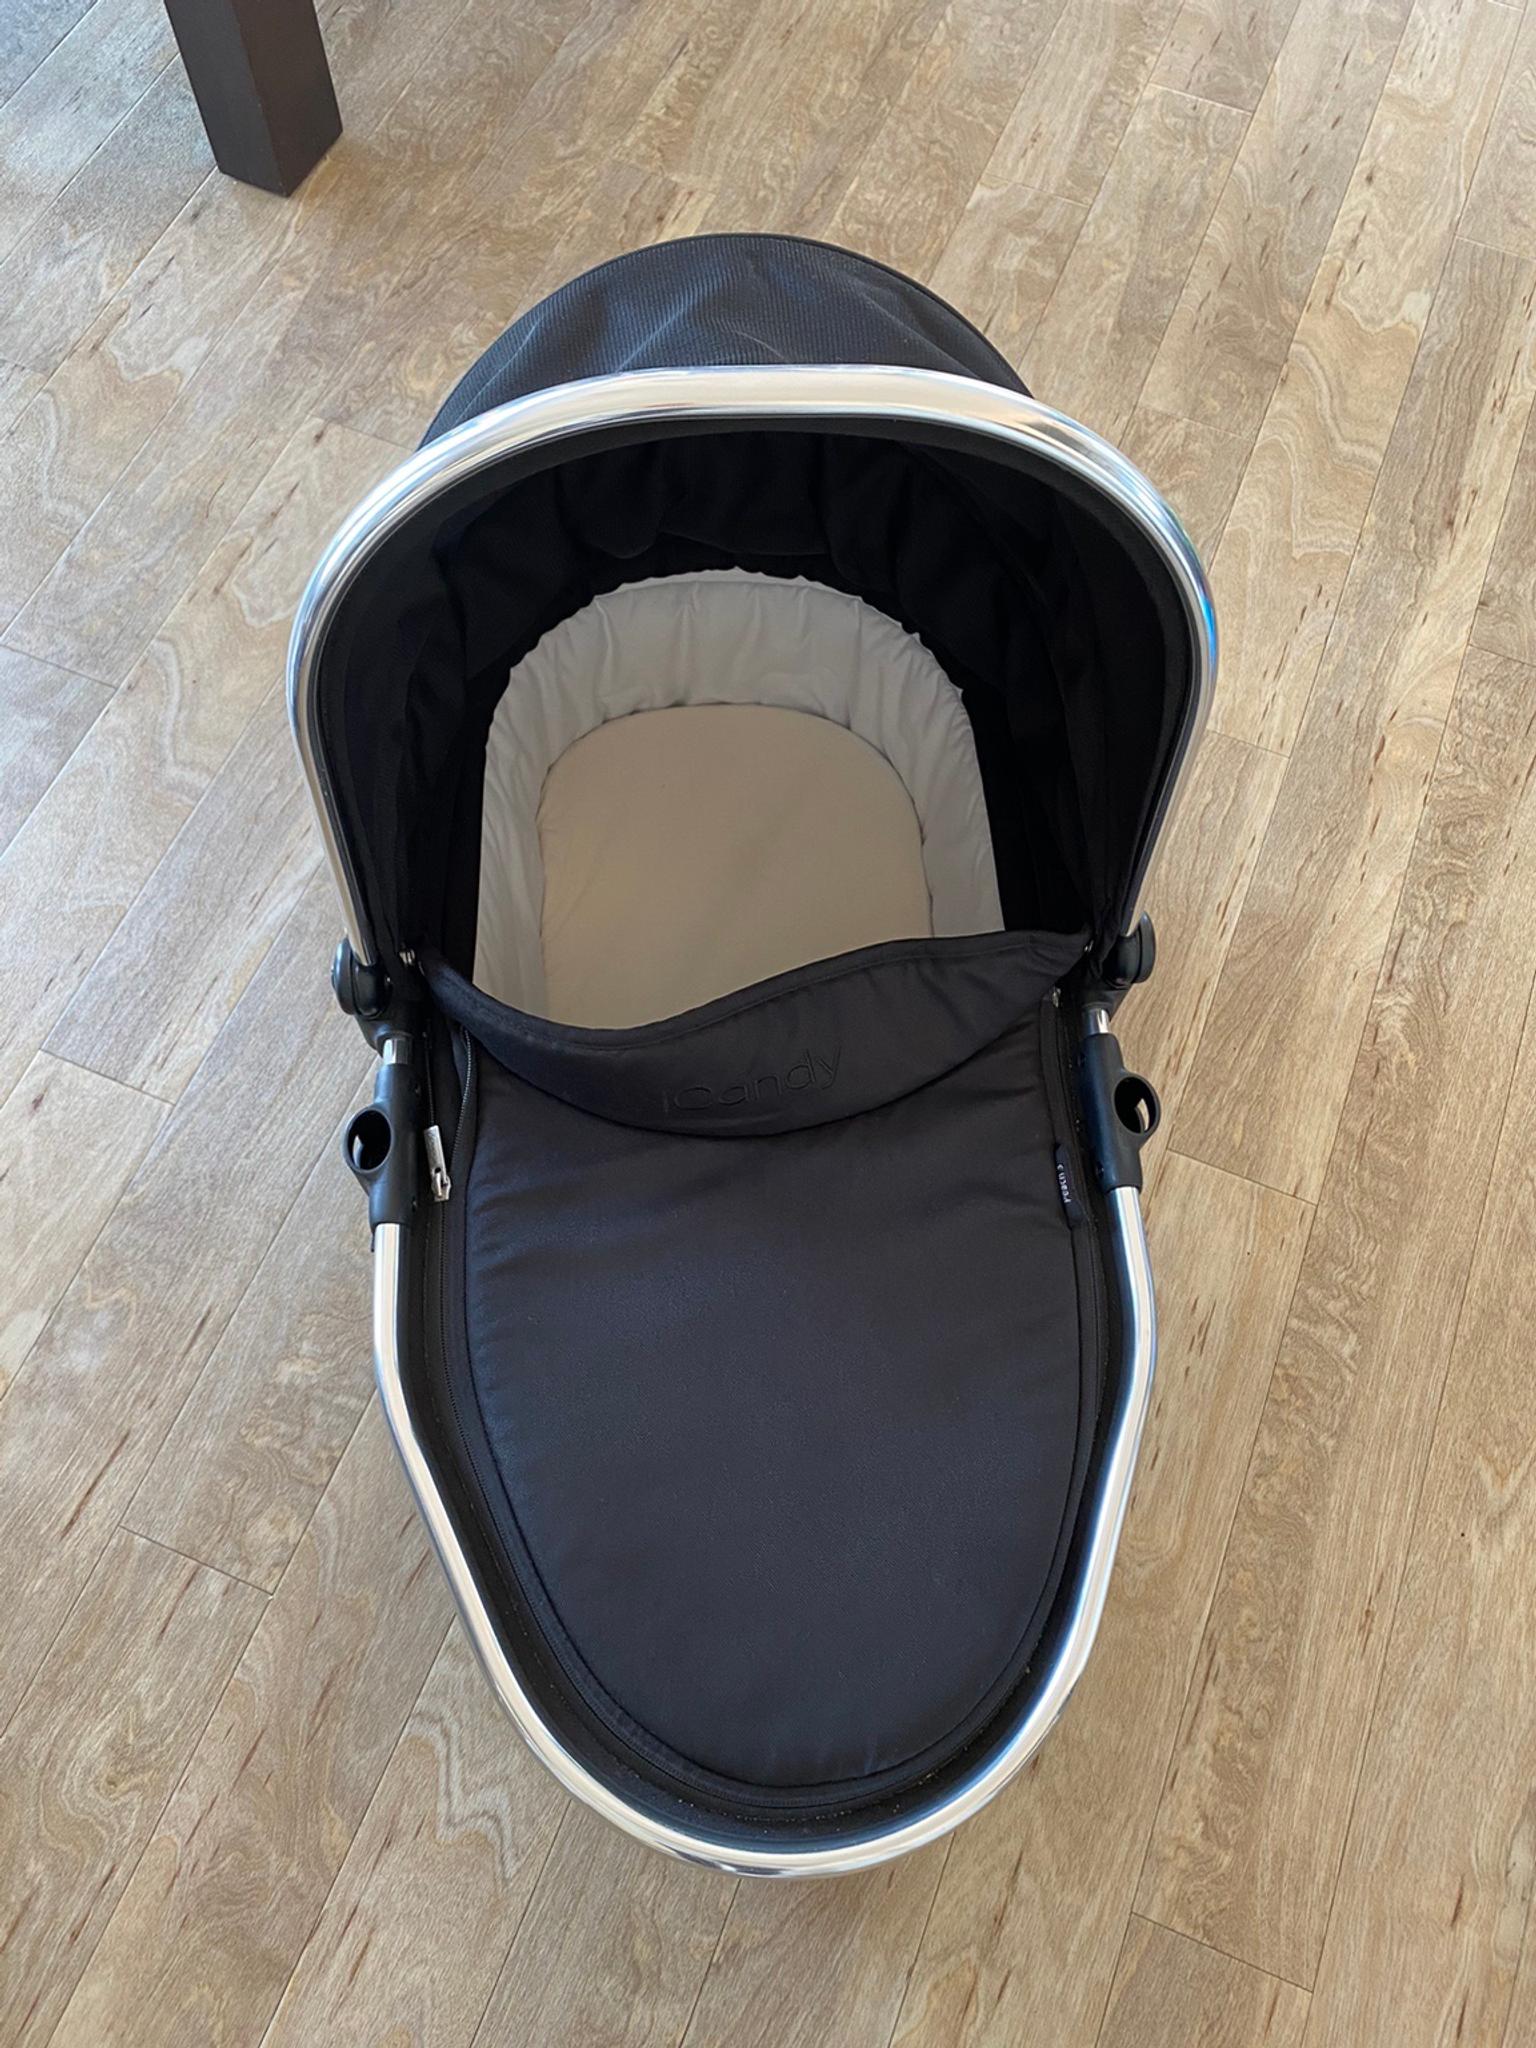 icandy peach lower carrycot